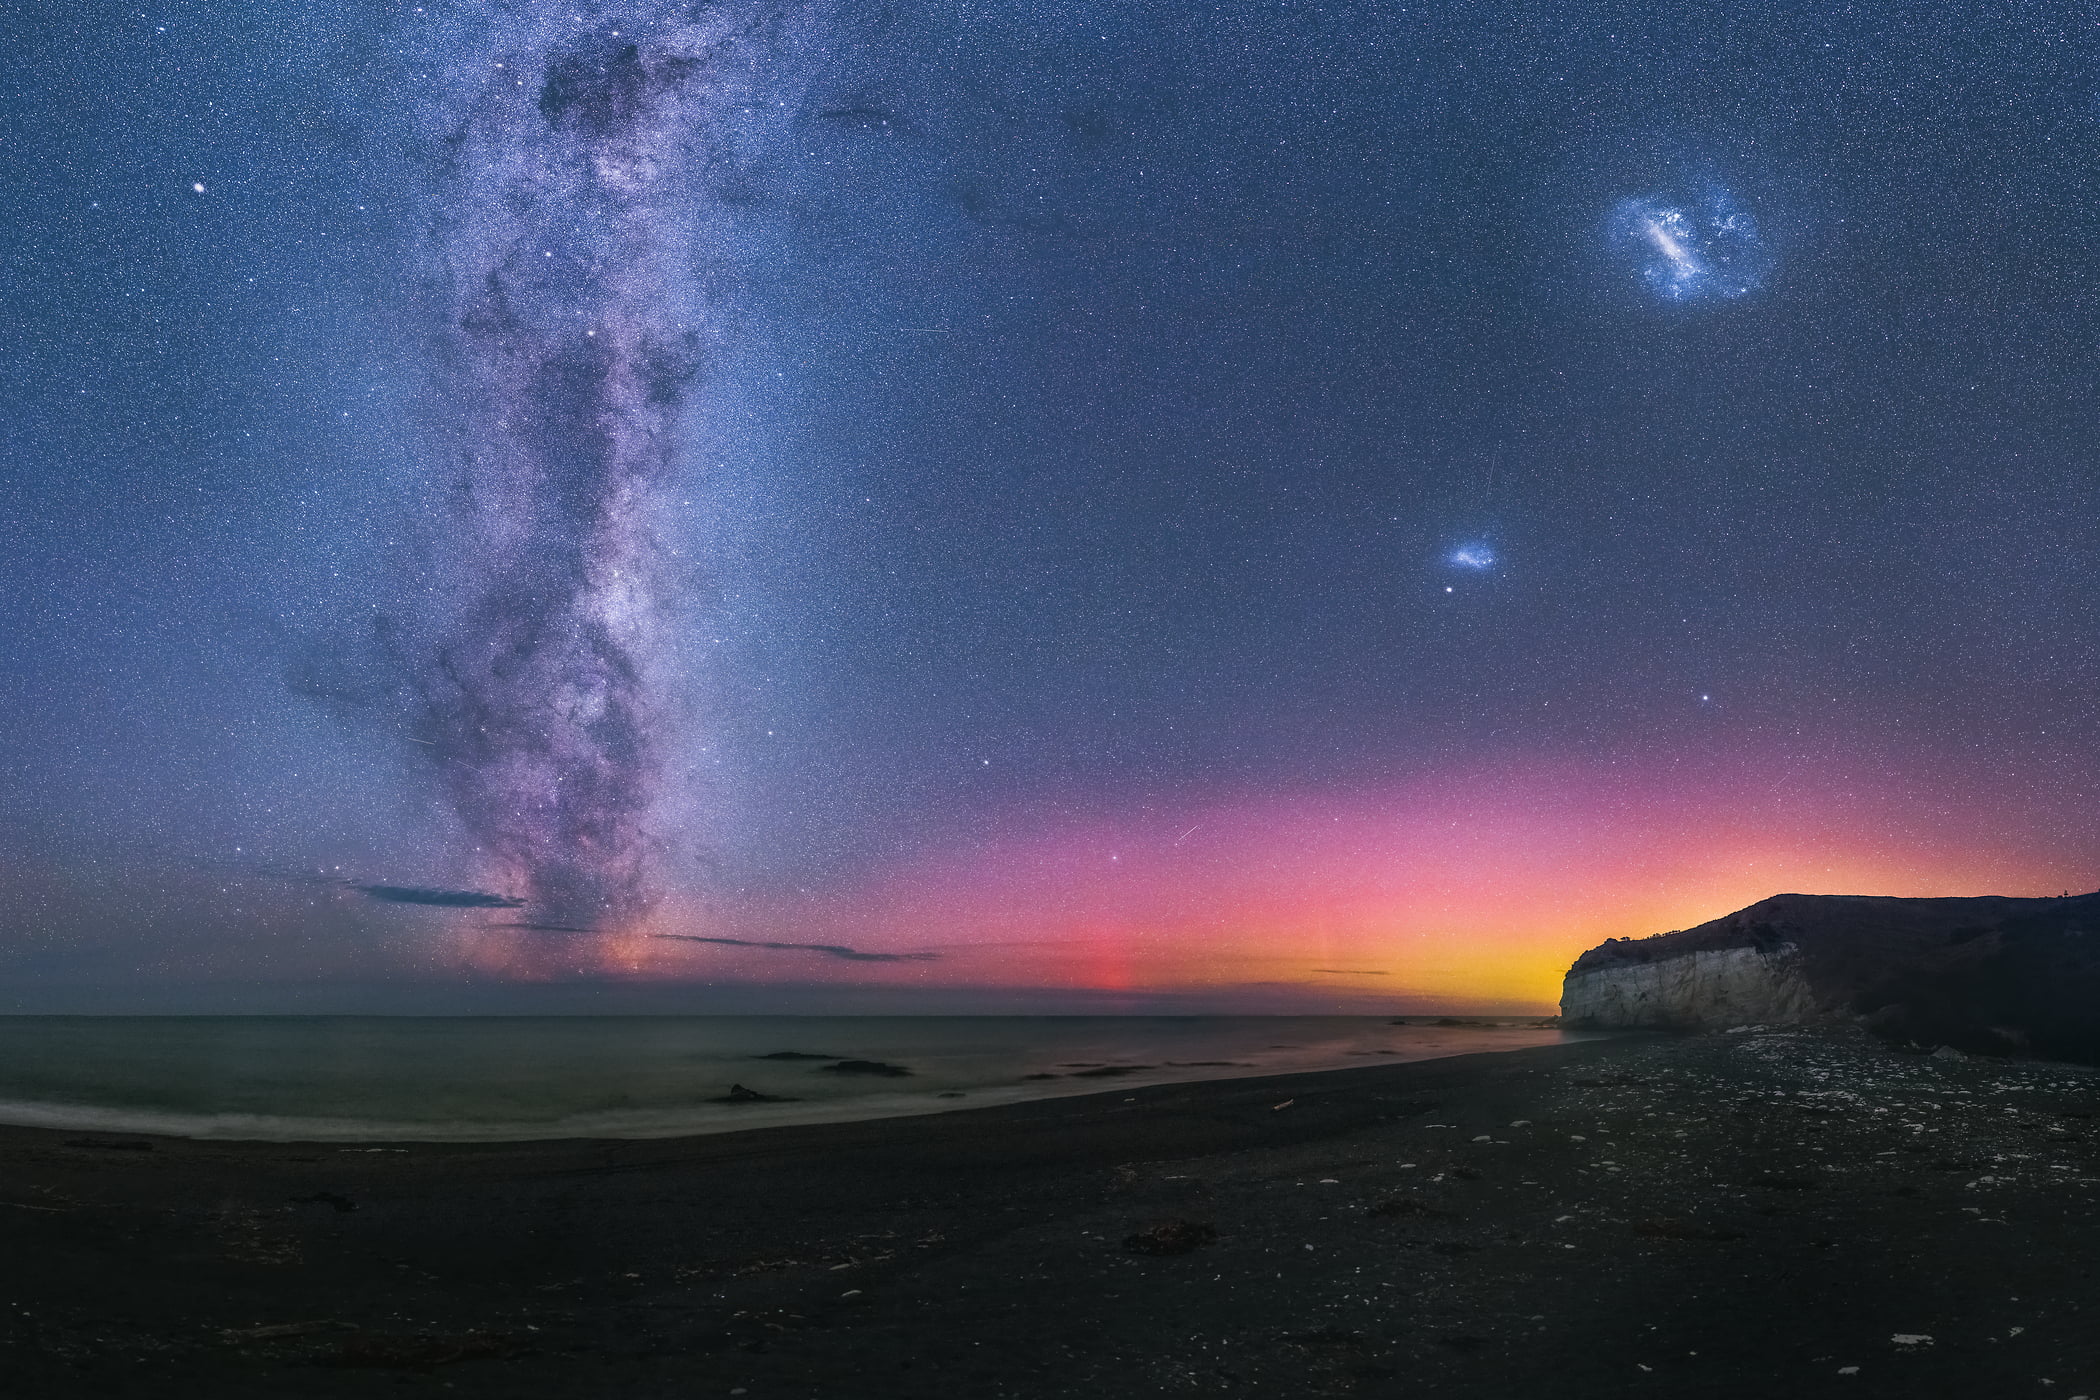 261 megapixels! A very high resolution, large-format VAST photo print of the night sky, milky way, and stars over the ocean and a beach; fine art astrophotography landscape photo created by Paul Wilson in Nape Nape, New Zealand.